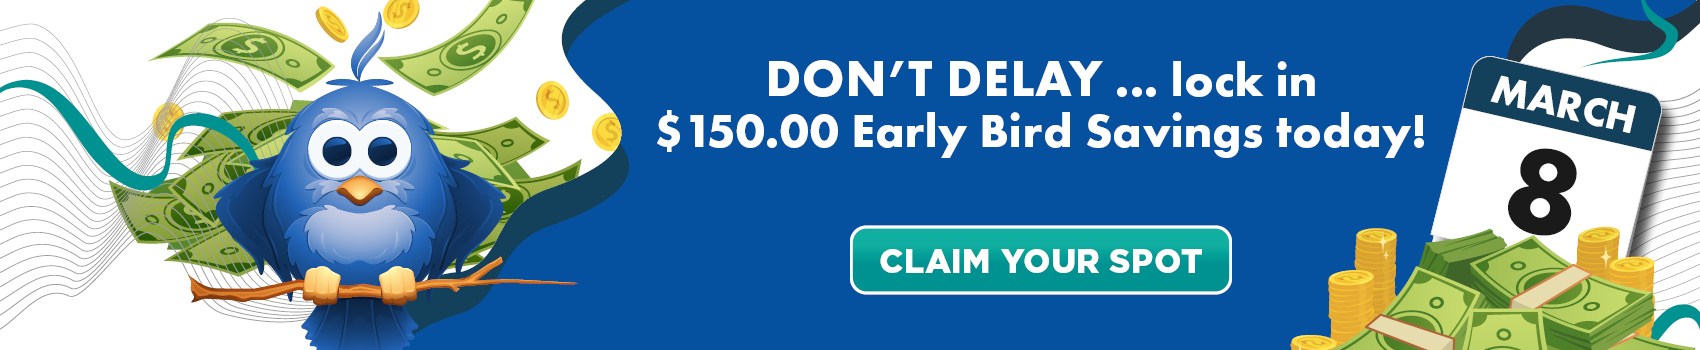 Don’t delay … lock in $150.00 Early Bird Savings today! CLAIM YOUR SPOT